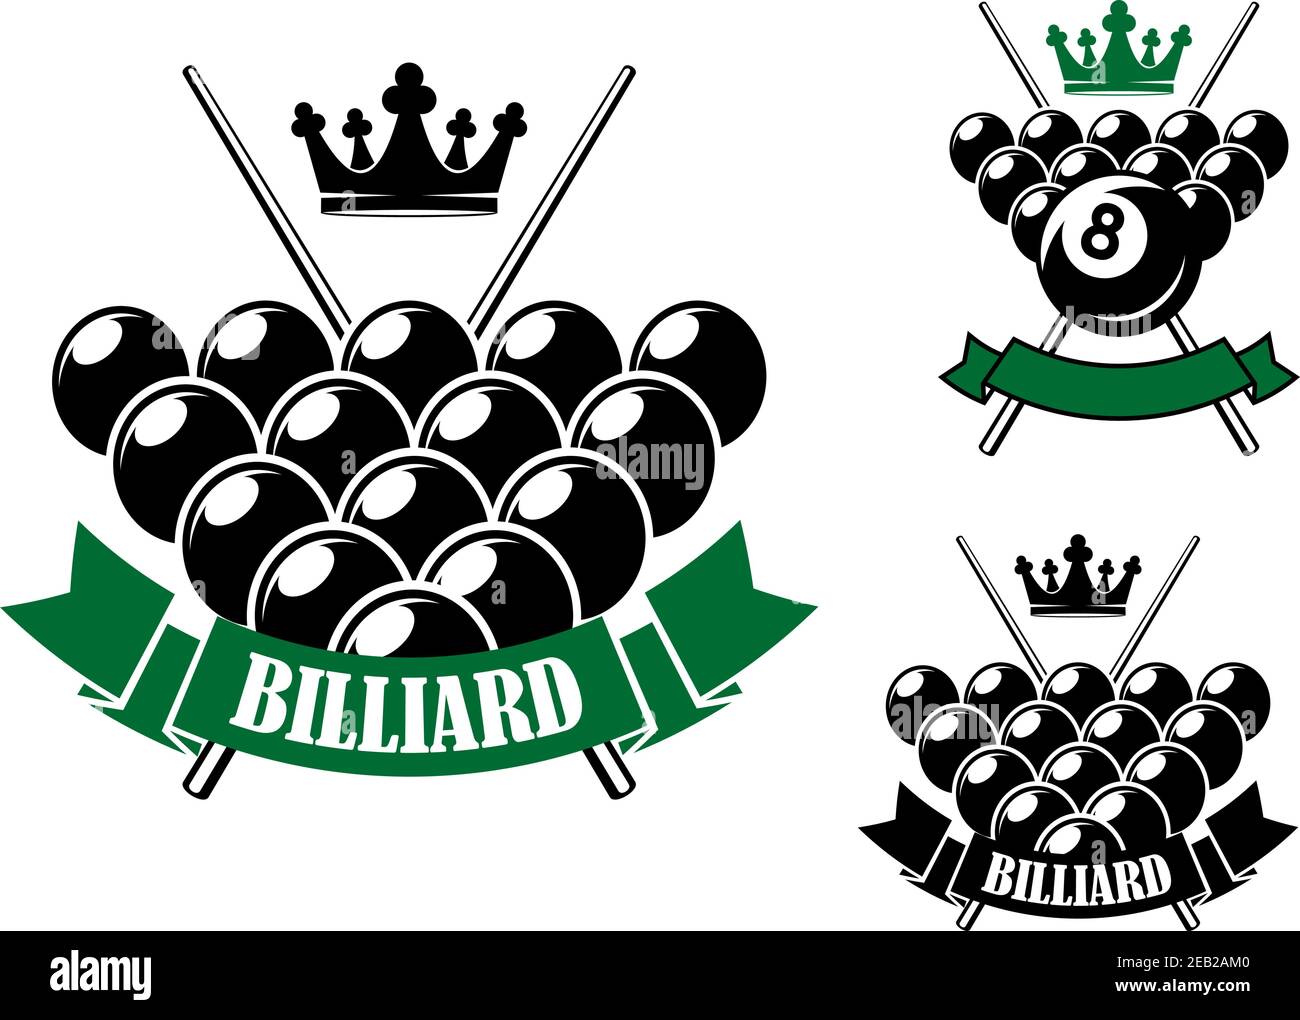 Billiards or pool icons design with billiard balls in starting position, crossed cues on the background, crowns and ribbon banners Stock Vector